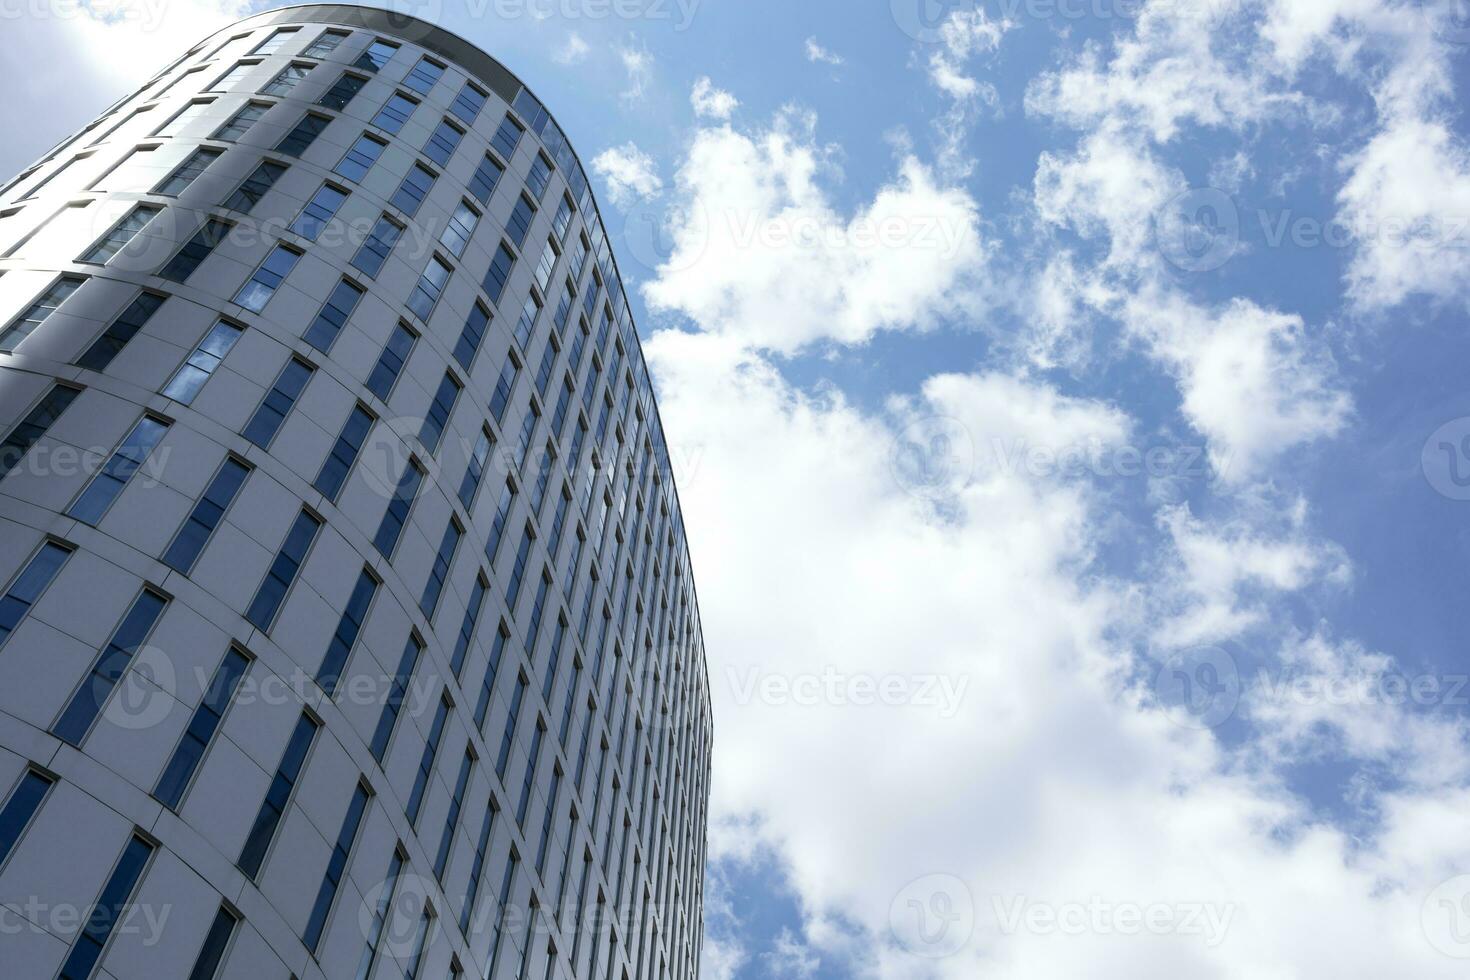 Facade Of Beautiful Skyscraper Or Tower and Blue Shiny Sky on Background. Financial Center, Business Development concept. Copy Space on Right. Horizontal Plane. Modern Building, Lifestyle photo